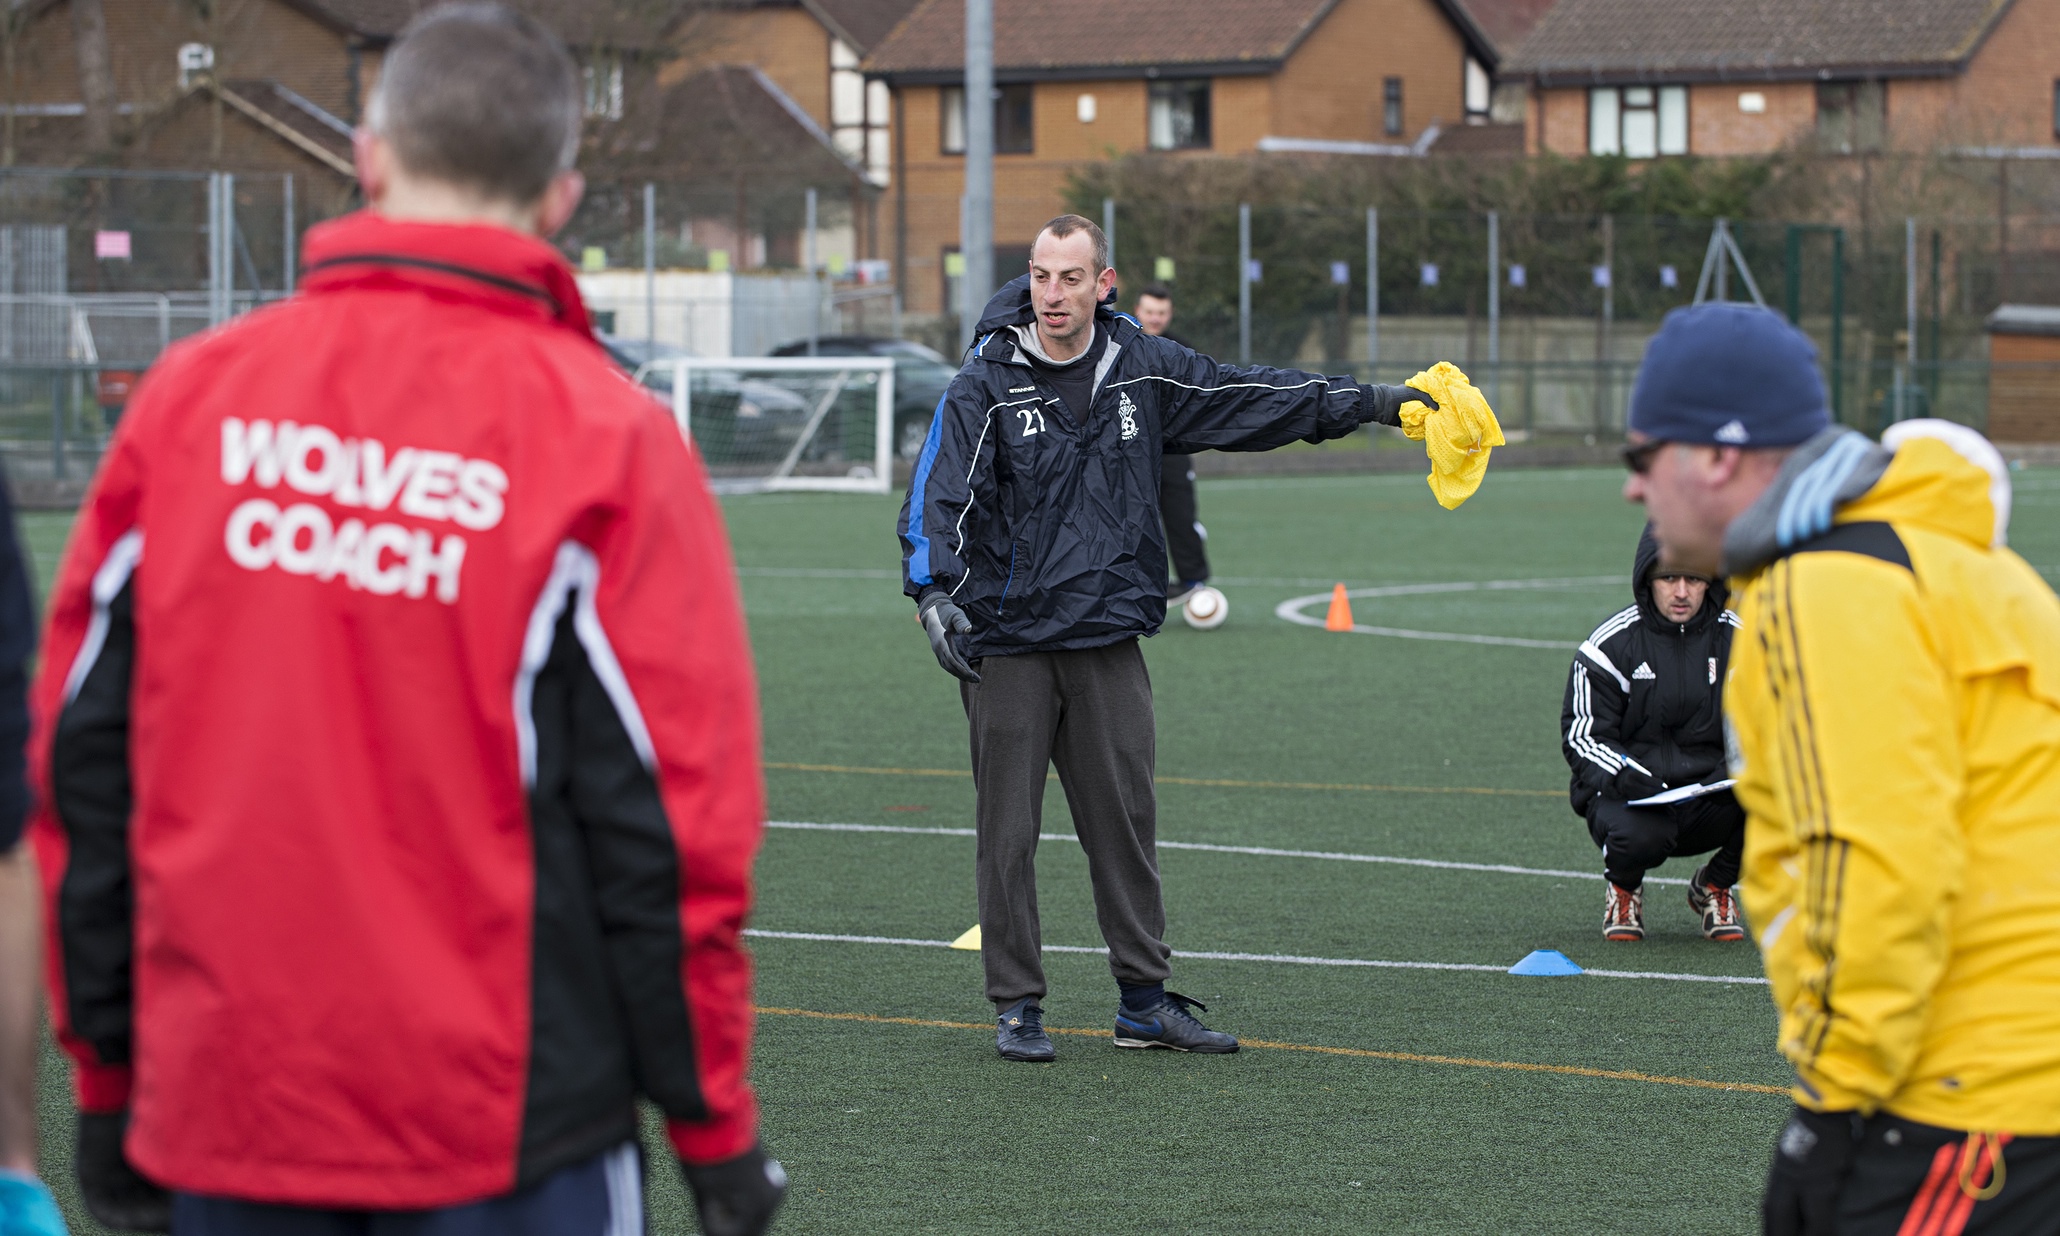 Want to become a football coach? Here is how to take the first step